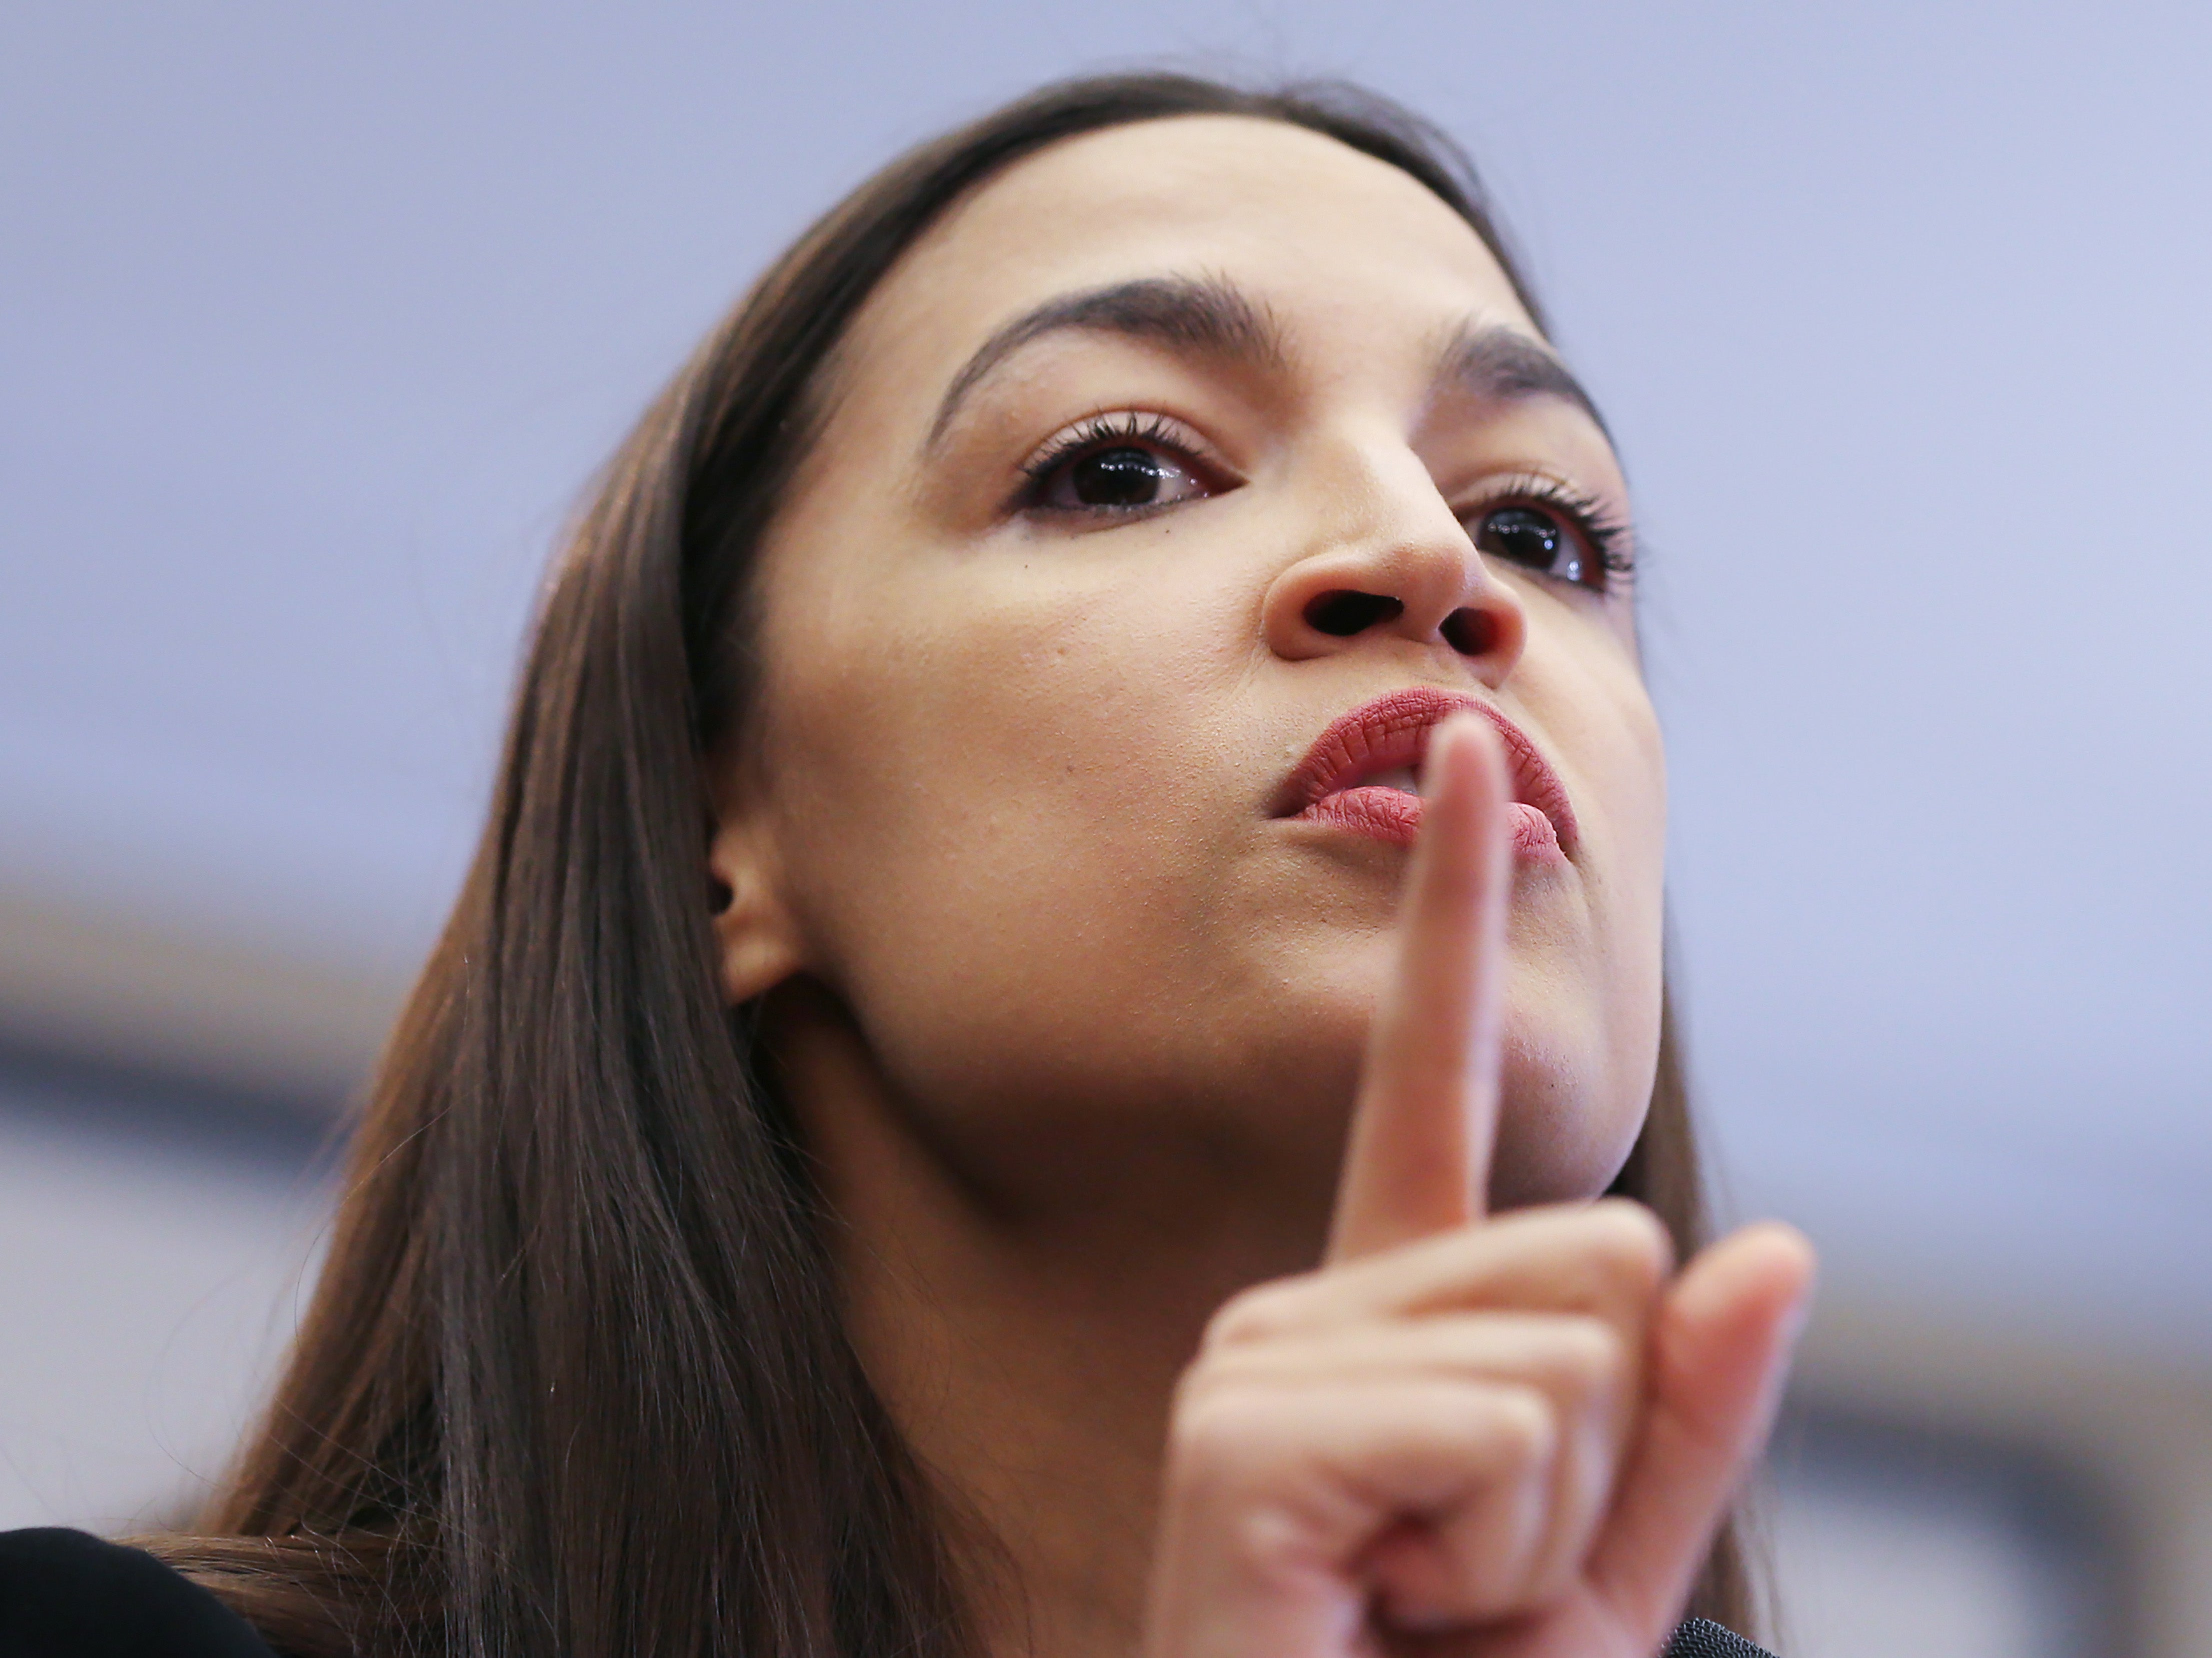 Alexandria Ocasio-Cortez (D-NY) speaks at a news conference introducing the ‘People’s Housing Platform’ on Capitol Hill on 29 January 2020